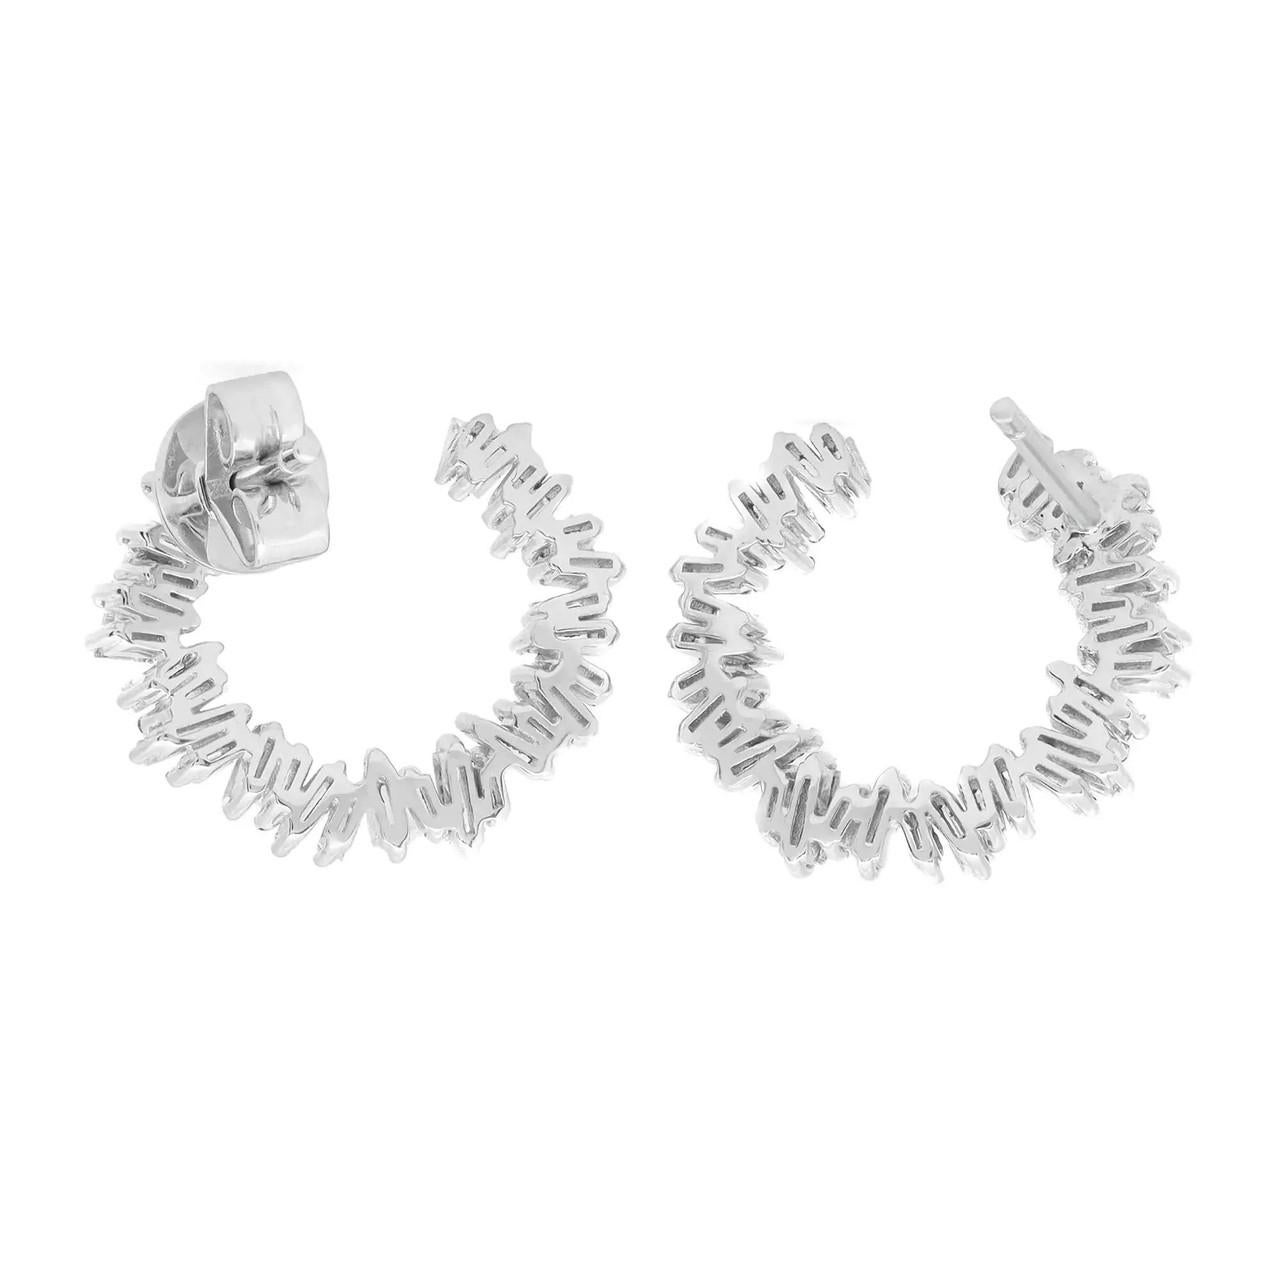 Indulge in timeless elegance with these exquisite C-Shaped Baguette Cut diamond stud earrings, expertly crafted in 18K white gold. The classic design showcases the mesmerizing beauty of baguette-cut diamonds, renowned for their sleek and elongated